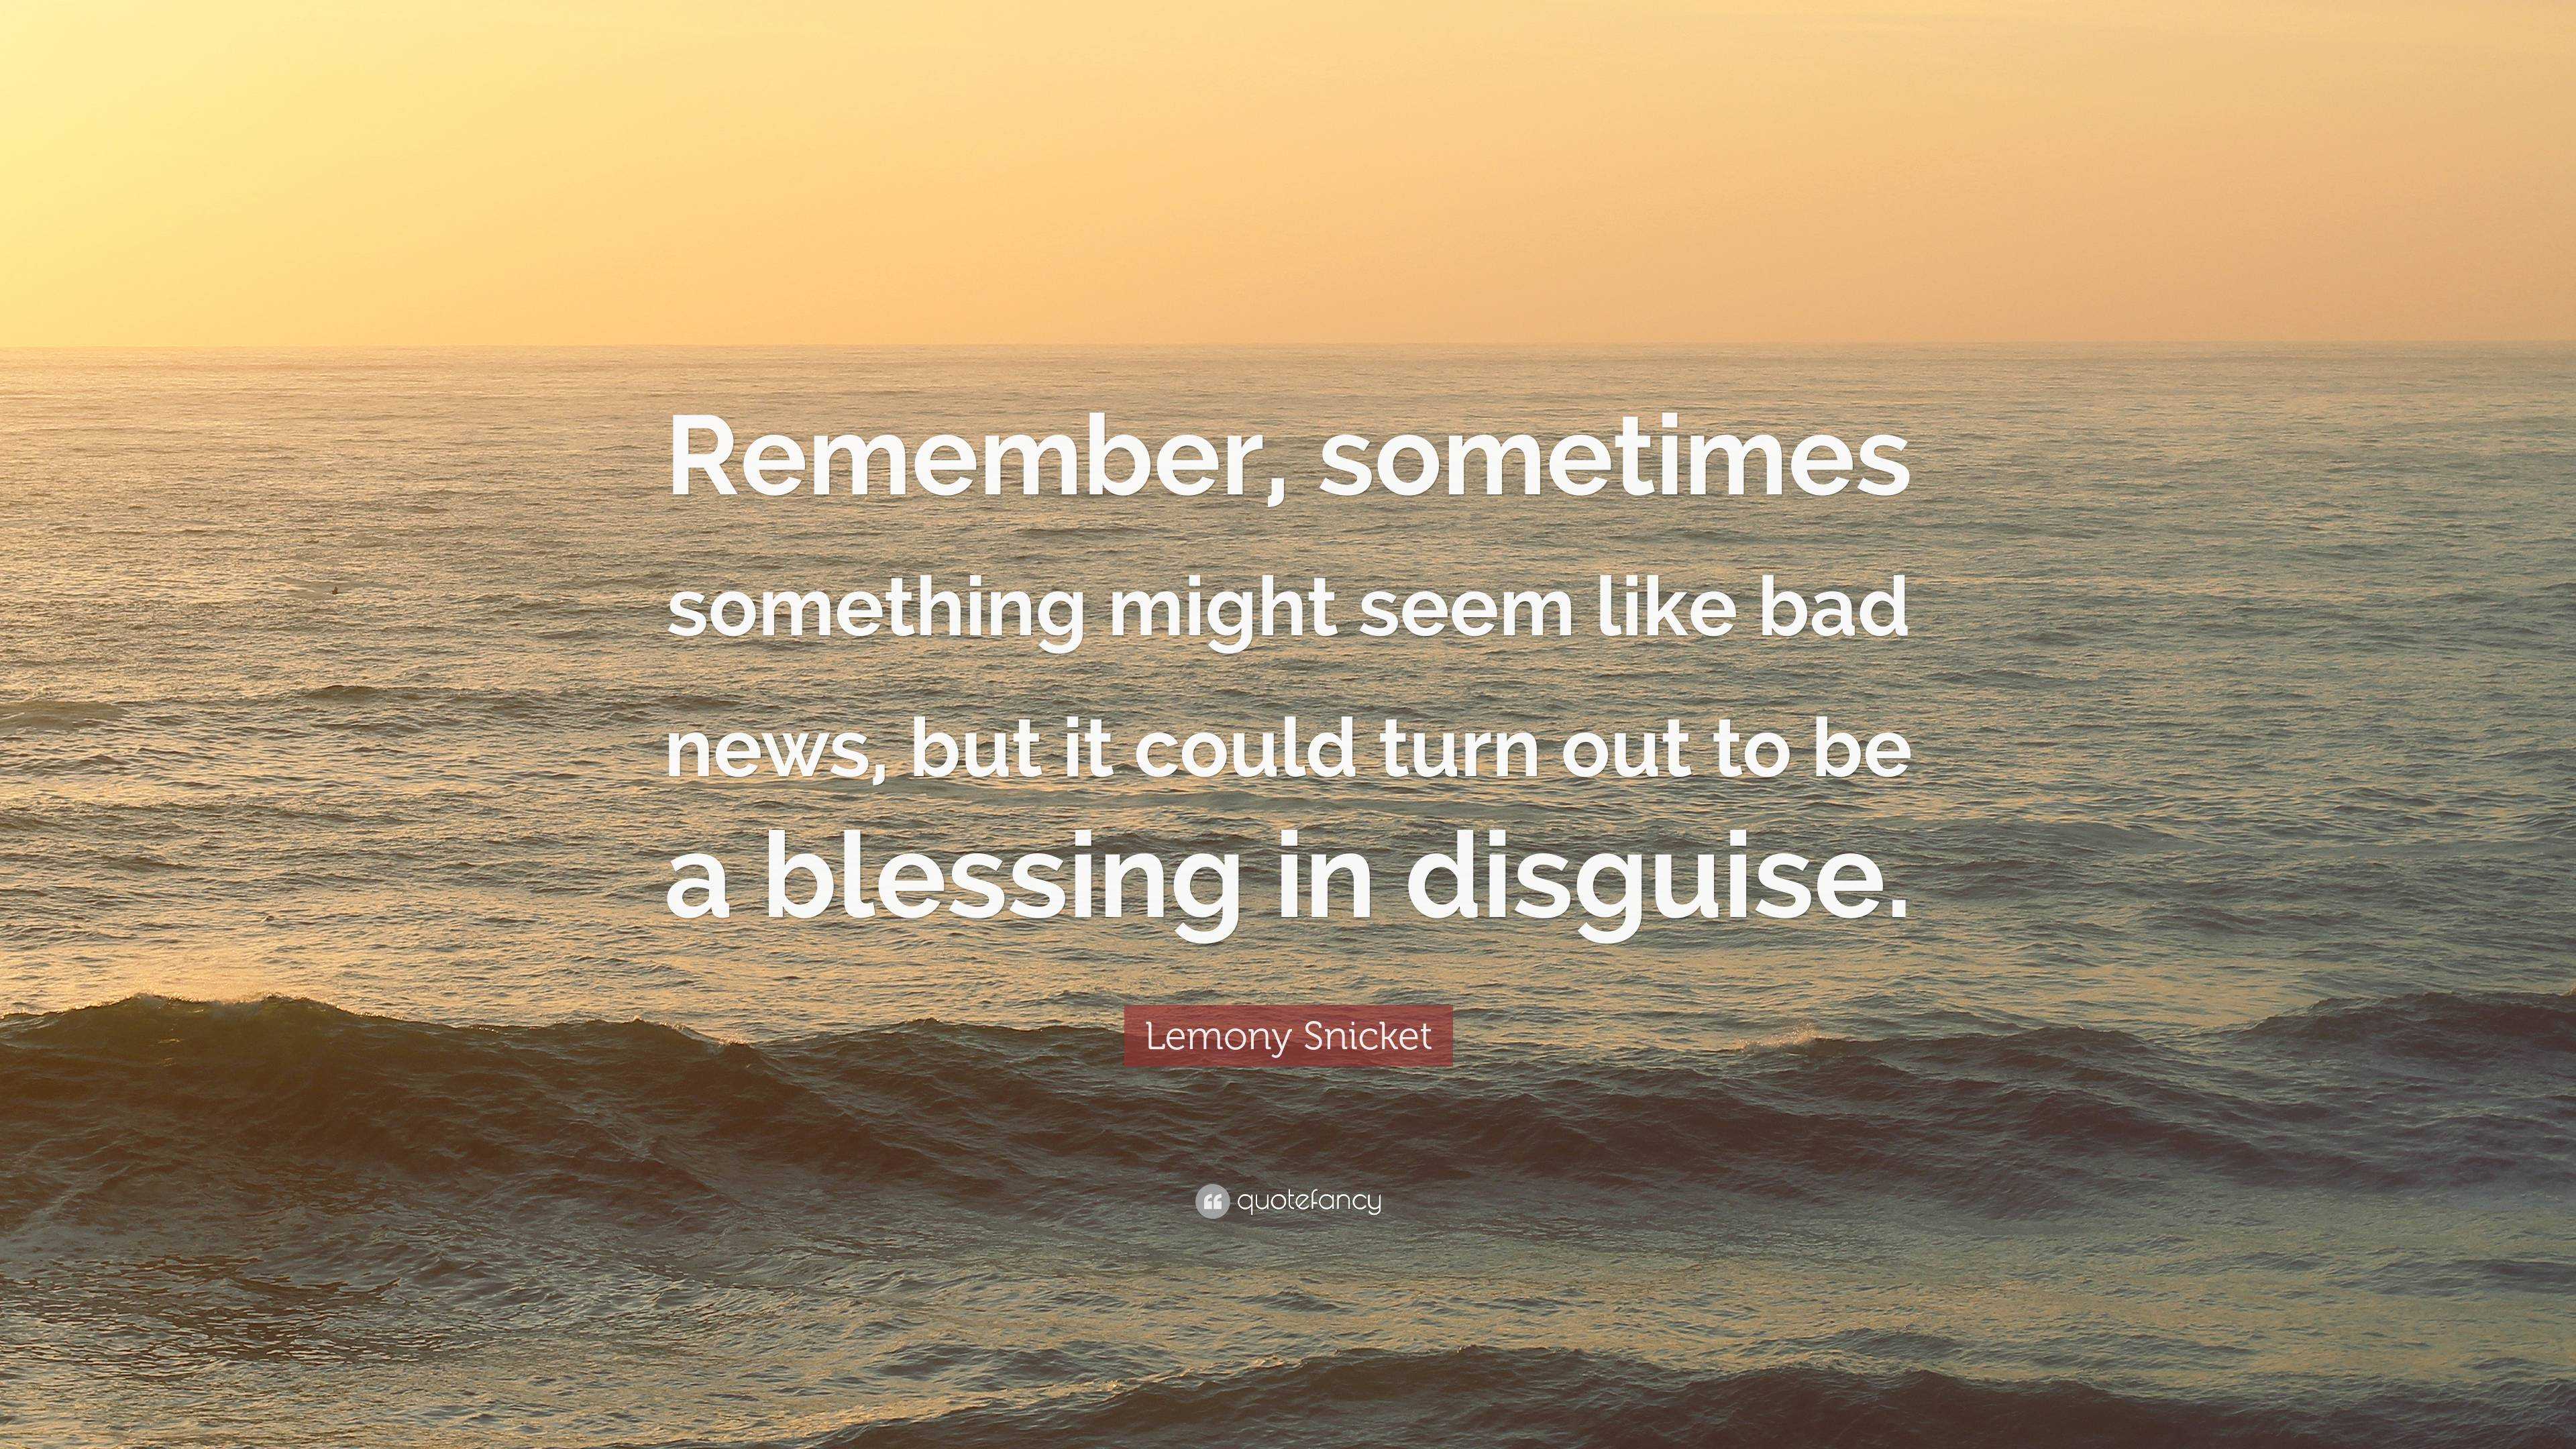 Idiom: Turn out to be a blessing in disguise